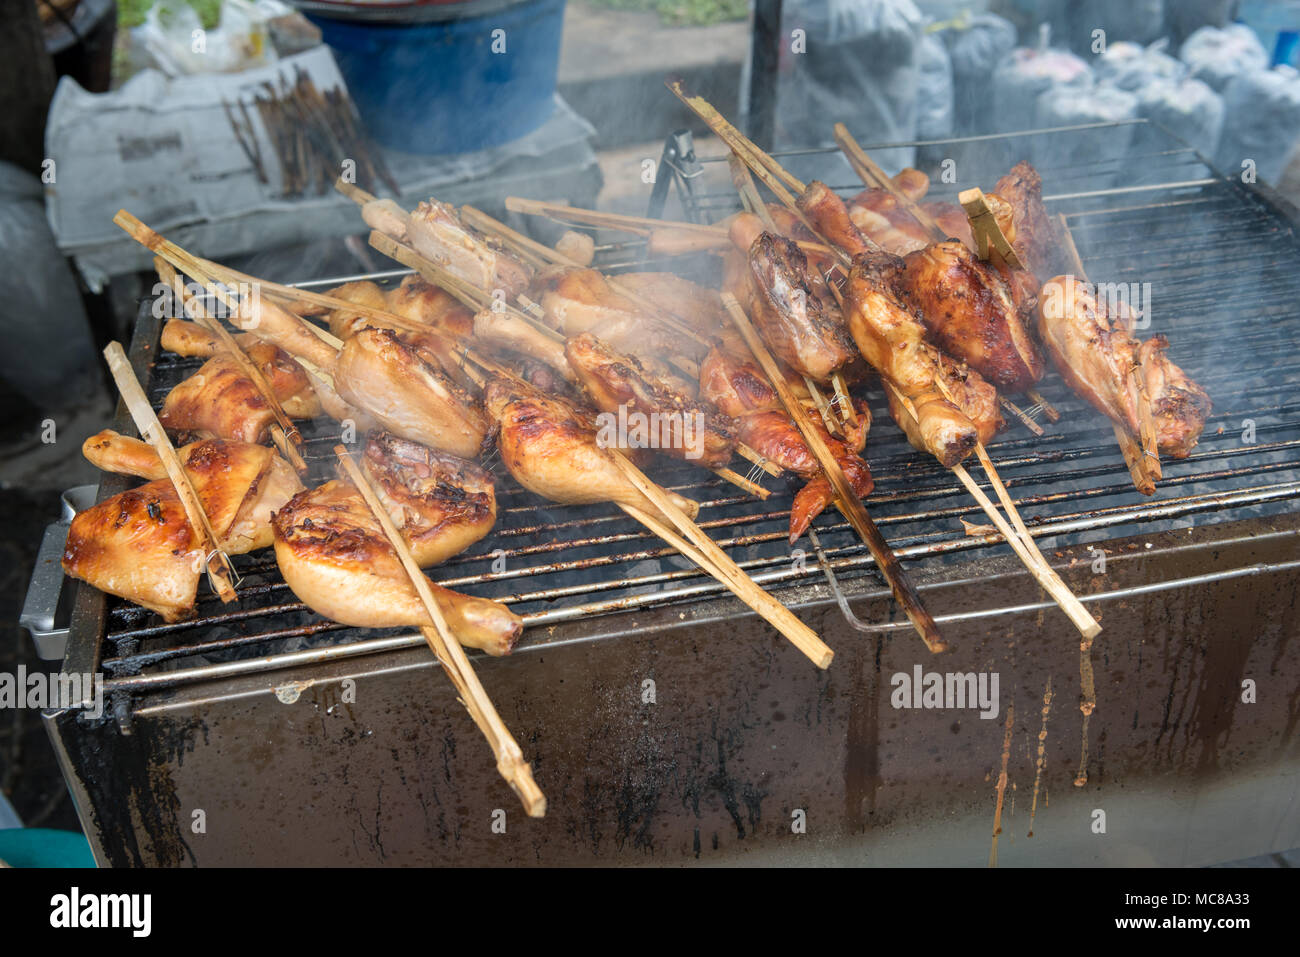 Chicken wing street food cooking on a charcoal grill in Bangkok Thailand Stock Photo